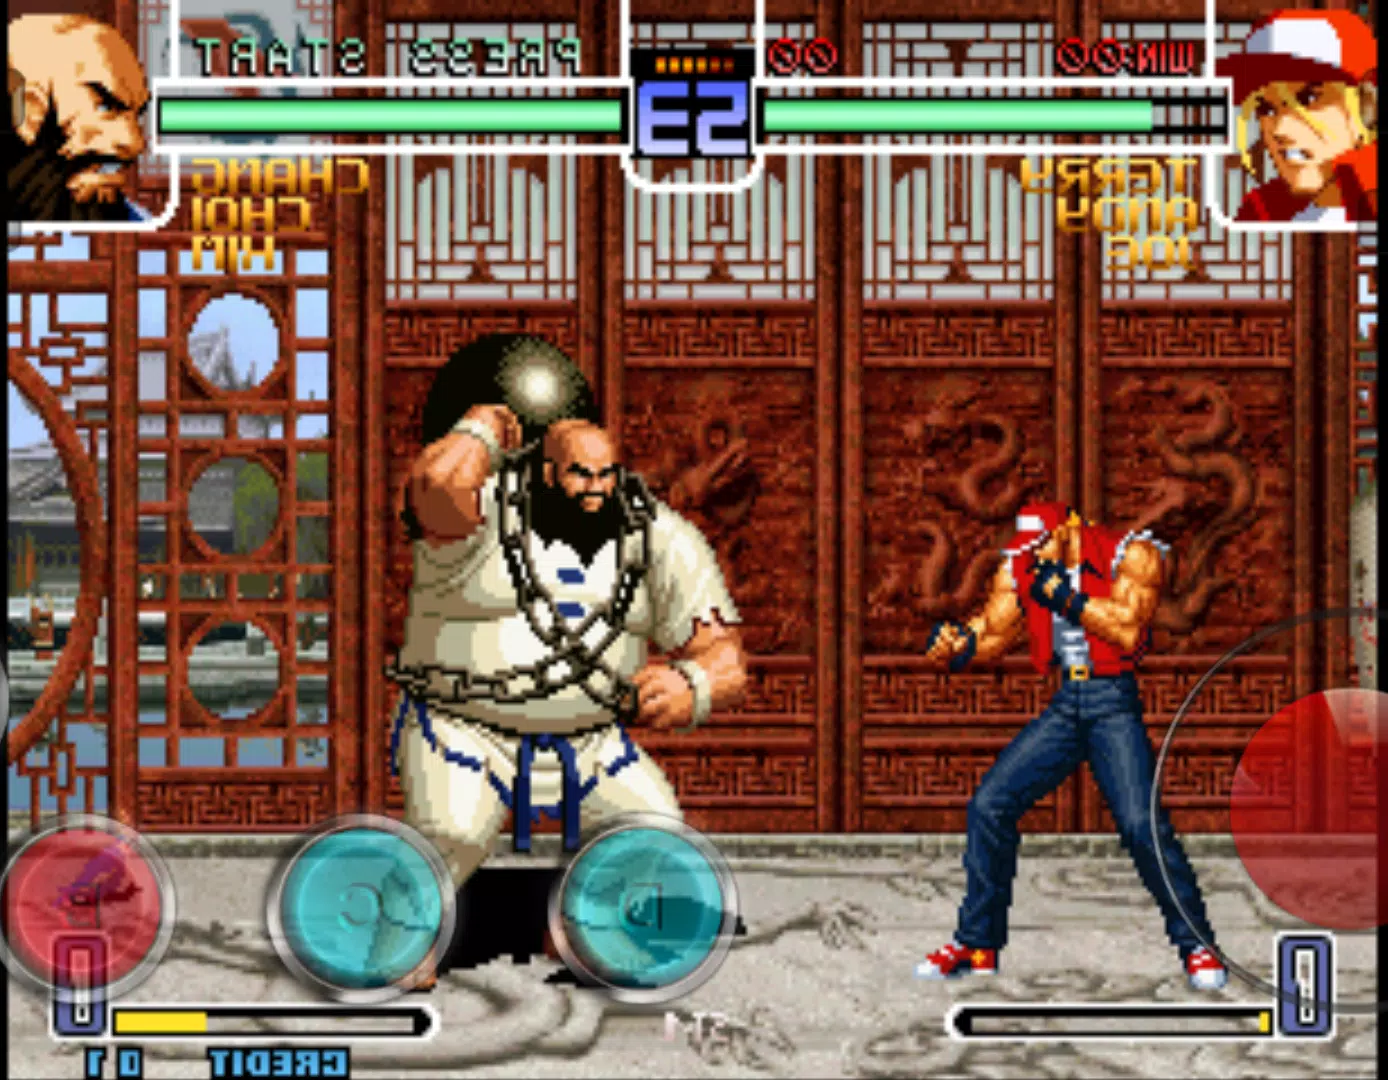 Download do APK de arcade the king of fighter 2002 magic plus 2 para Android